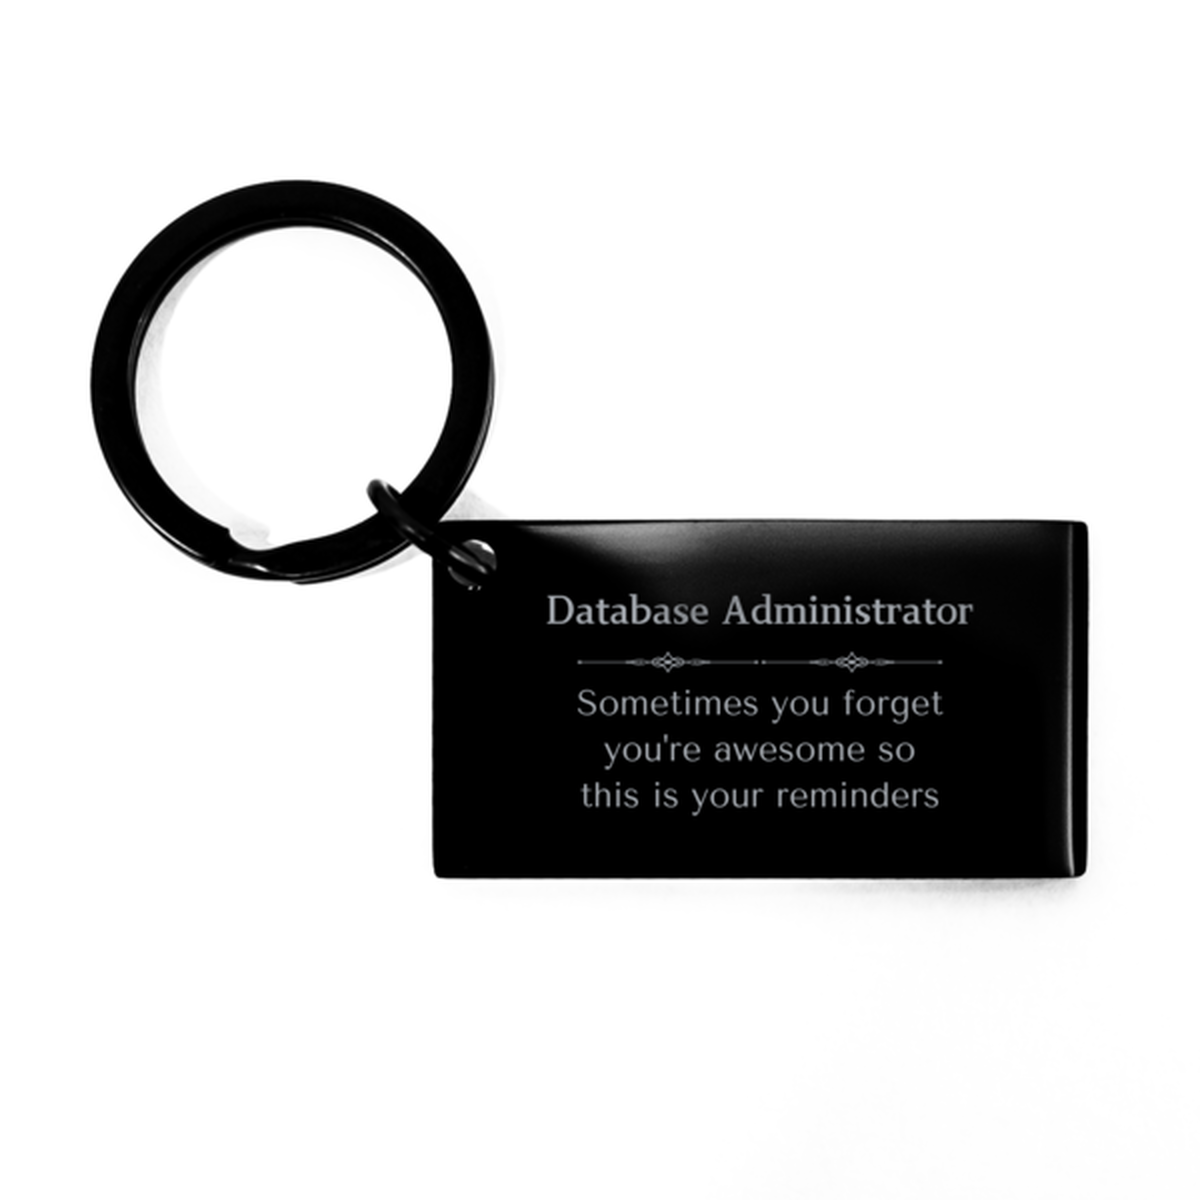 Sentimental Database Administrator Keychain, Funeral Director Sometimes you forget you're awesome so this is your reminders, Graduation Christmas Birthday Gifts for Database Administrator, Men, Women, Coworkers